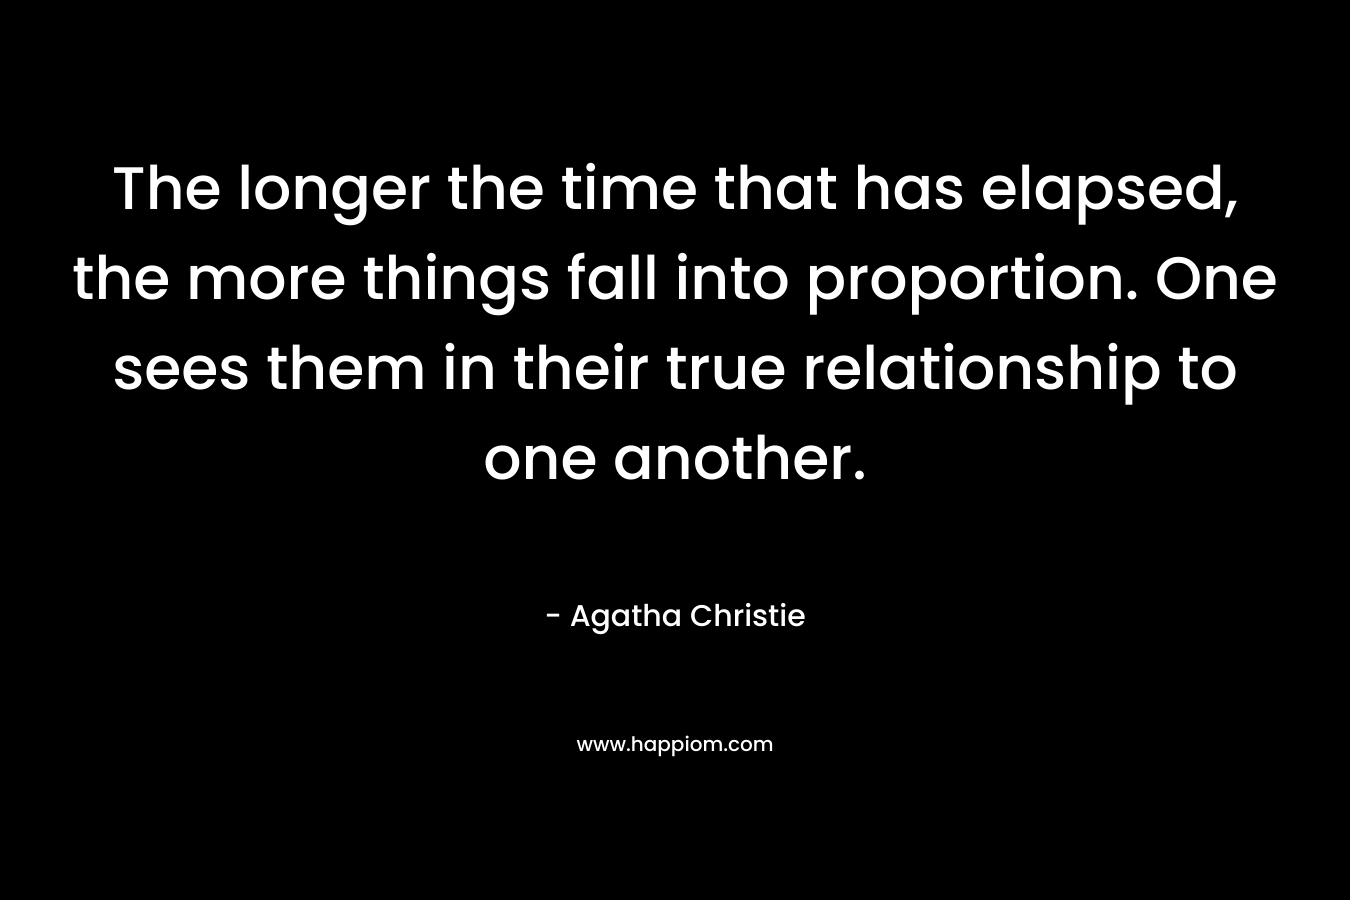 The longer the time that has elapsed, the more things fall into proportion. One sees them in their true relationship to one another. – Agatha Christie